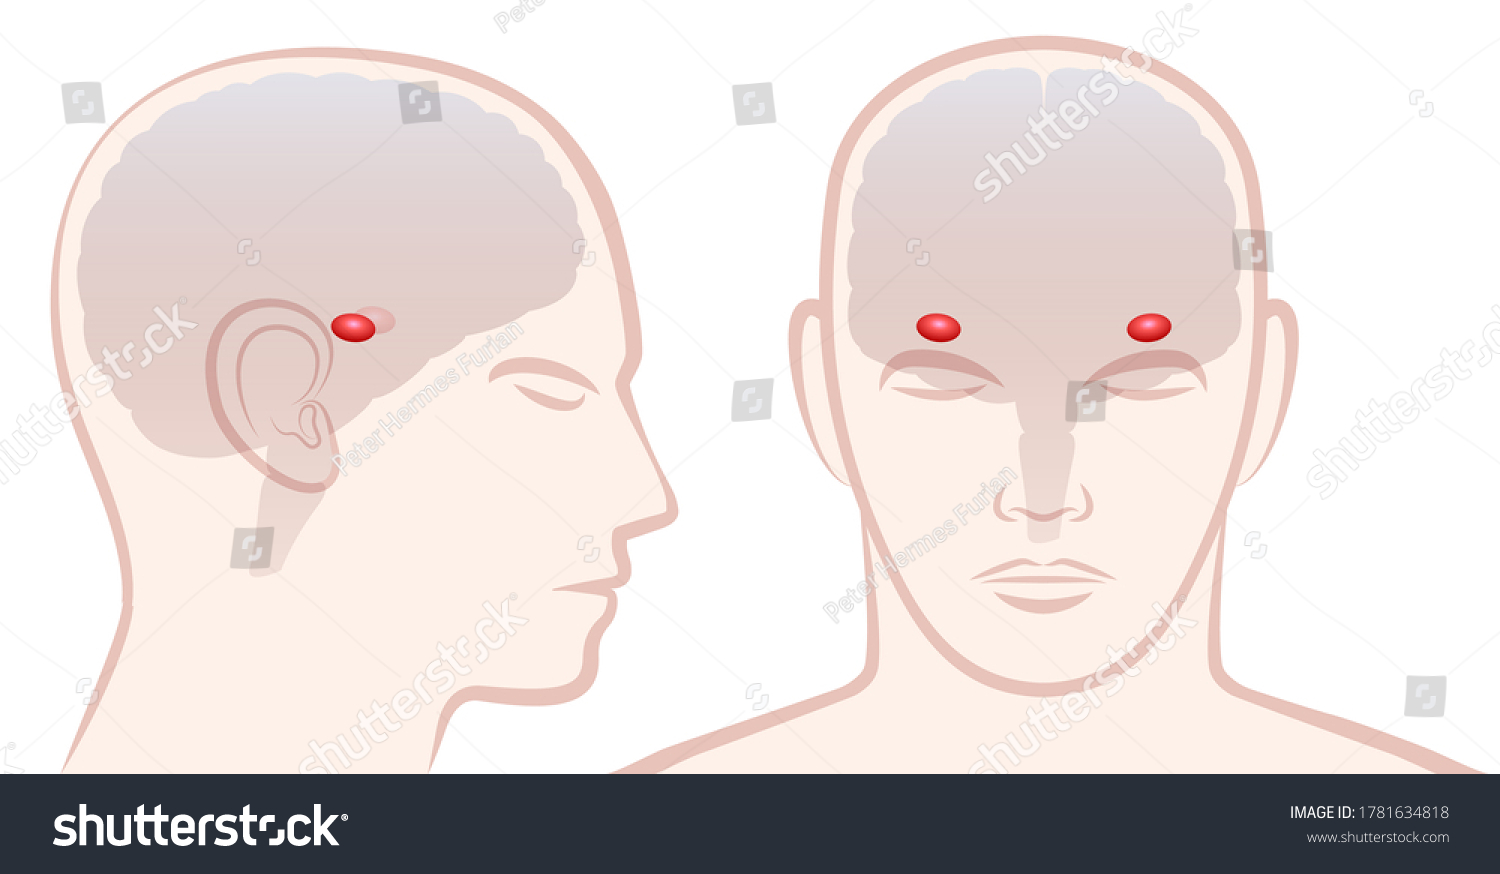 SVG of Amygdala. Profile and frontal view with location of pair of amigdalas in a human brain. Isolated vector illustration on white background.
 svg